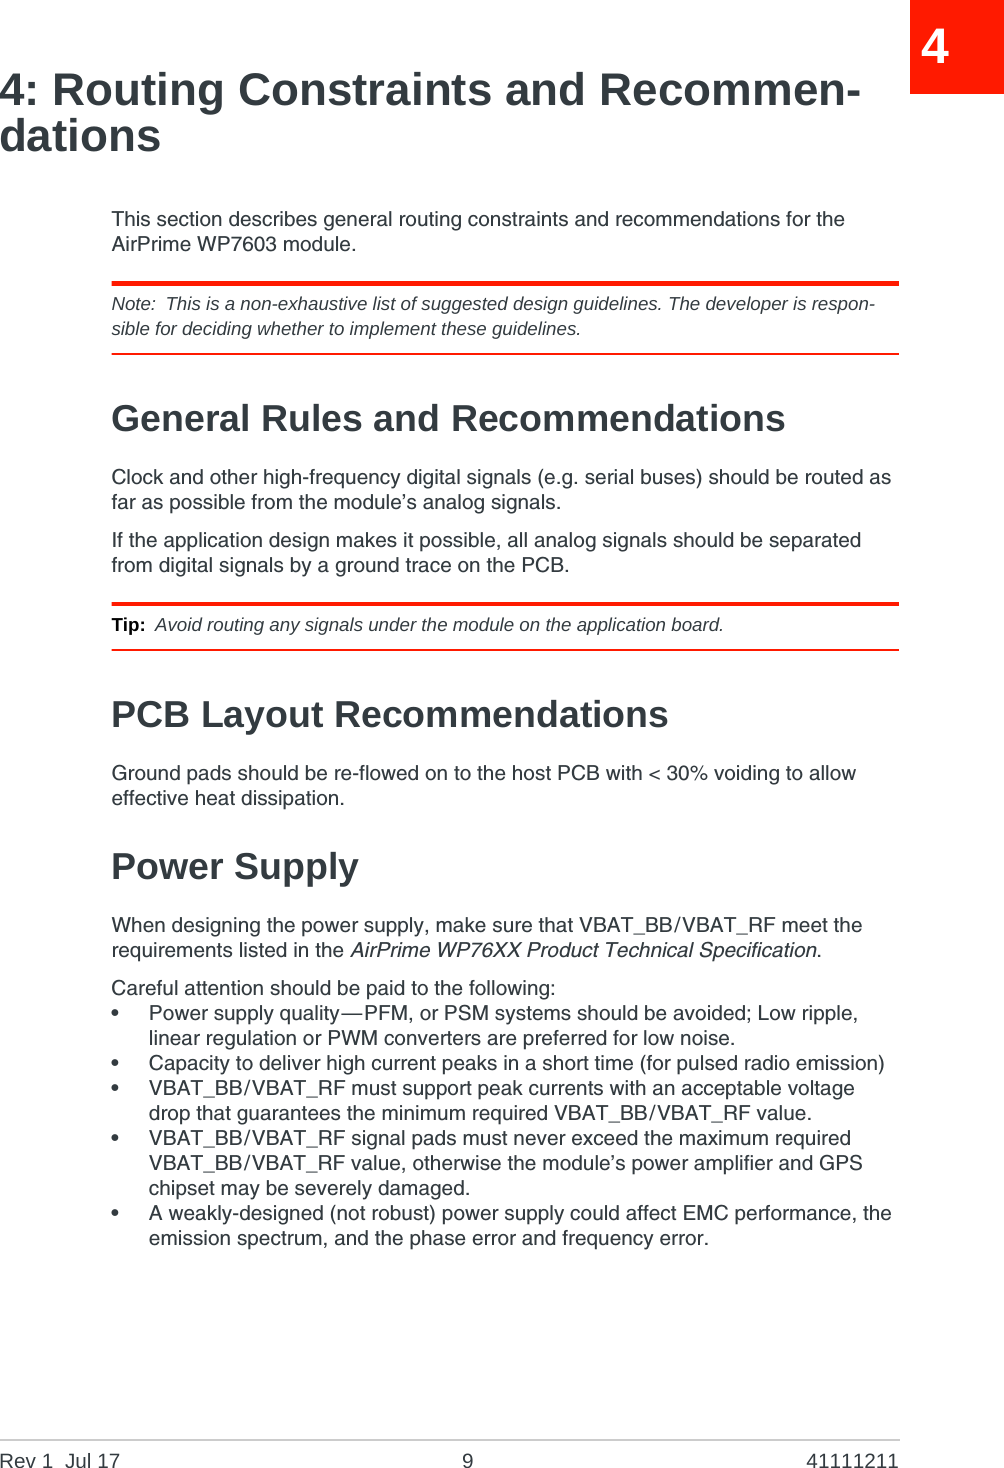 Rev 1  Jul 17 9 4111121144: Routing Constraints and Recommen-dationsThis section describes general routing constraints and recommendations for the AirPrime WP7603 module.Note: This is a non-exhaustive list of suggested design guidelines. The developer is respon-sible for deciding whether to implement these guidelines.General Rules and RecommendationsClock and other high-frequency digital signals (e.g. serial buses) should be routed as far as possible from the module’s analog signals.If the application design makes it possible, all analog signals should be separated from digital signals by a ground trace on the PCB.Tip: Avoid routing any signals under the module on the application board.PCB Layout RecommendationsGround pads should be re-flowed on to the host PCB with &lt; 30% voiding to allow effective heat dissipation.Power SupplyWhen designing the power supply, make sure that VBAT_BB/VBAT_RF meet the requirements listed in the AirPrime WP76XX Product Technical Specification.Careful attention should be paid to the following:•Power supply quality—PFM, or PSM systems should be avoided; Low ripple, linear regulation or PWM converters are preferred for low noise.•Capacity to deliver high current peaks in a short time (for pulsed radio emission)•VBAT_BB/VBAT_RF must support peak currents with an acceptable voltage drop that guarantees the minimum required VBAT_BB/VBAT_RF value.•VBAT_BB/VBAT_RF signal pads must never exceed the maximum required VBAT_BB/VBAT_RF value, otherwise the module’s power amplifier and GPS chipset may be severely damaged.•A weakly-designed (not robust) power supply could affect EMC performance, the emission spectrum, and the phase error and frequency error.